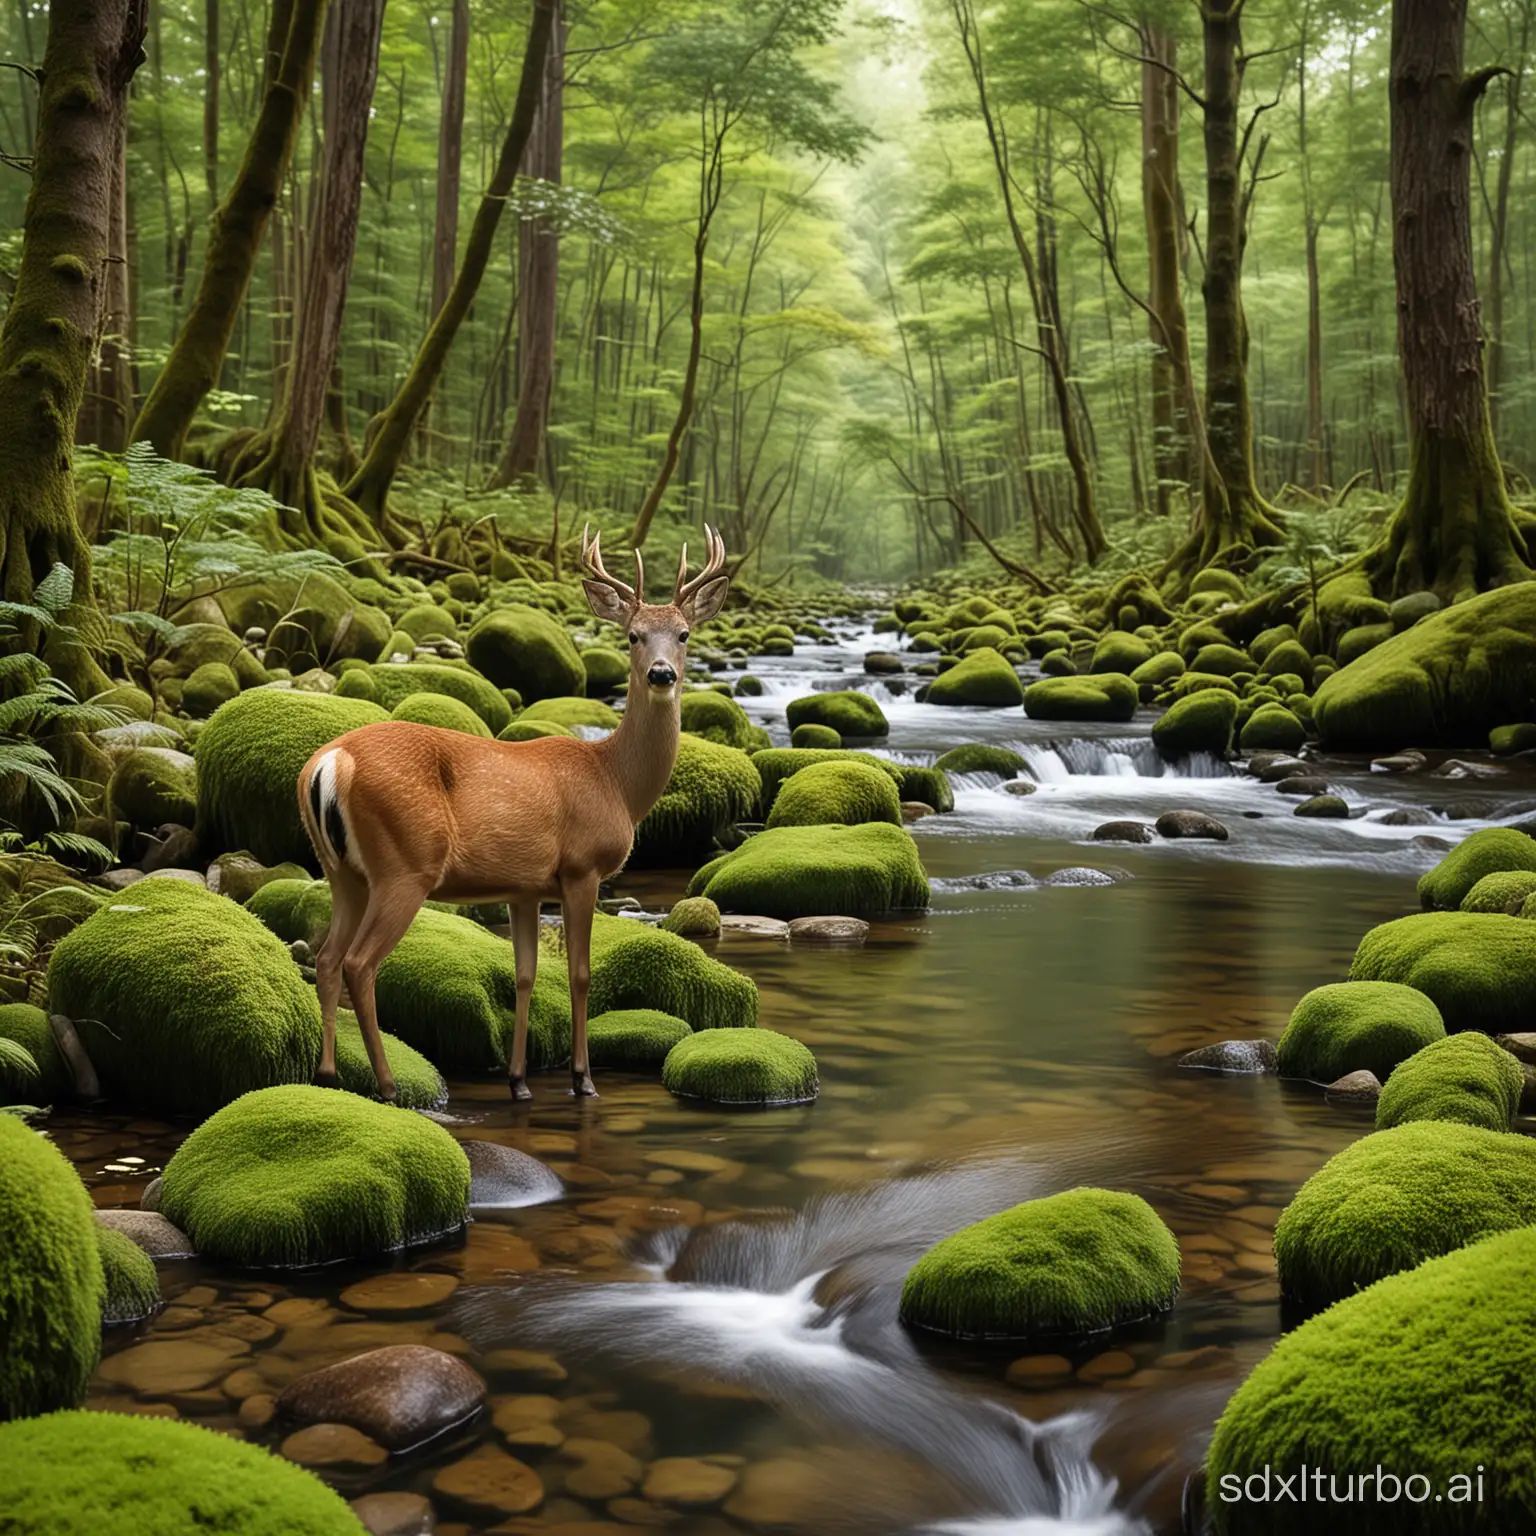 "Forest, river, rocks, moss, cute wild deer" A photo of a serene forest scene, where a crystal-clear river flows gently over moss-covered rocks. The lush greenery of the forest creates a tranquil atmosphere, while the moss adds a touch of vibrancy and texture. In the midst of this natural beauty, a cute wild deer appears, its gentle eyes and graceful presence adding a sense of enchantment to the scene. This photo captures the harmony between the elements of nature and evokes a feeling of peace and awe.